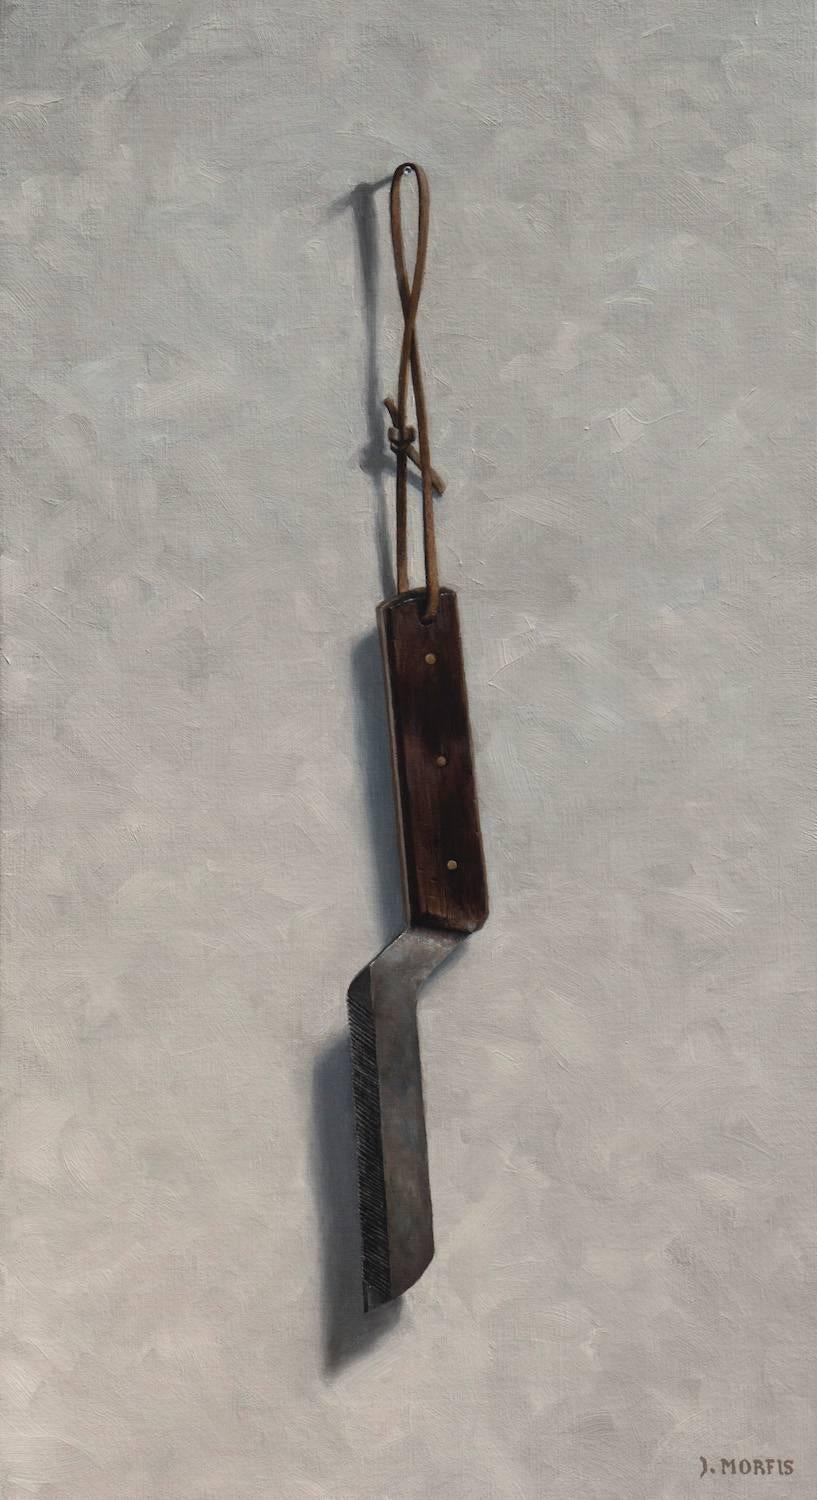 "Meriden Cutlery 1870" contemporary realist painting antique tool Trompe L'oeil